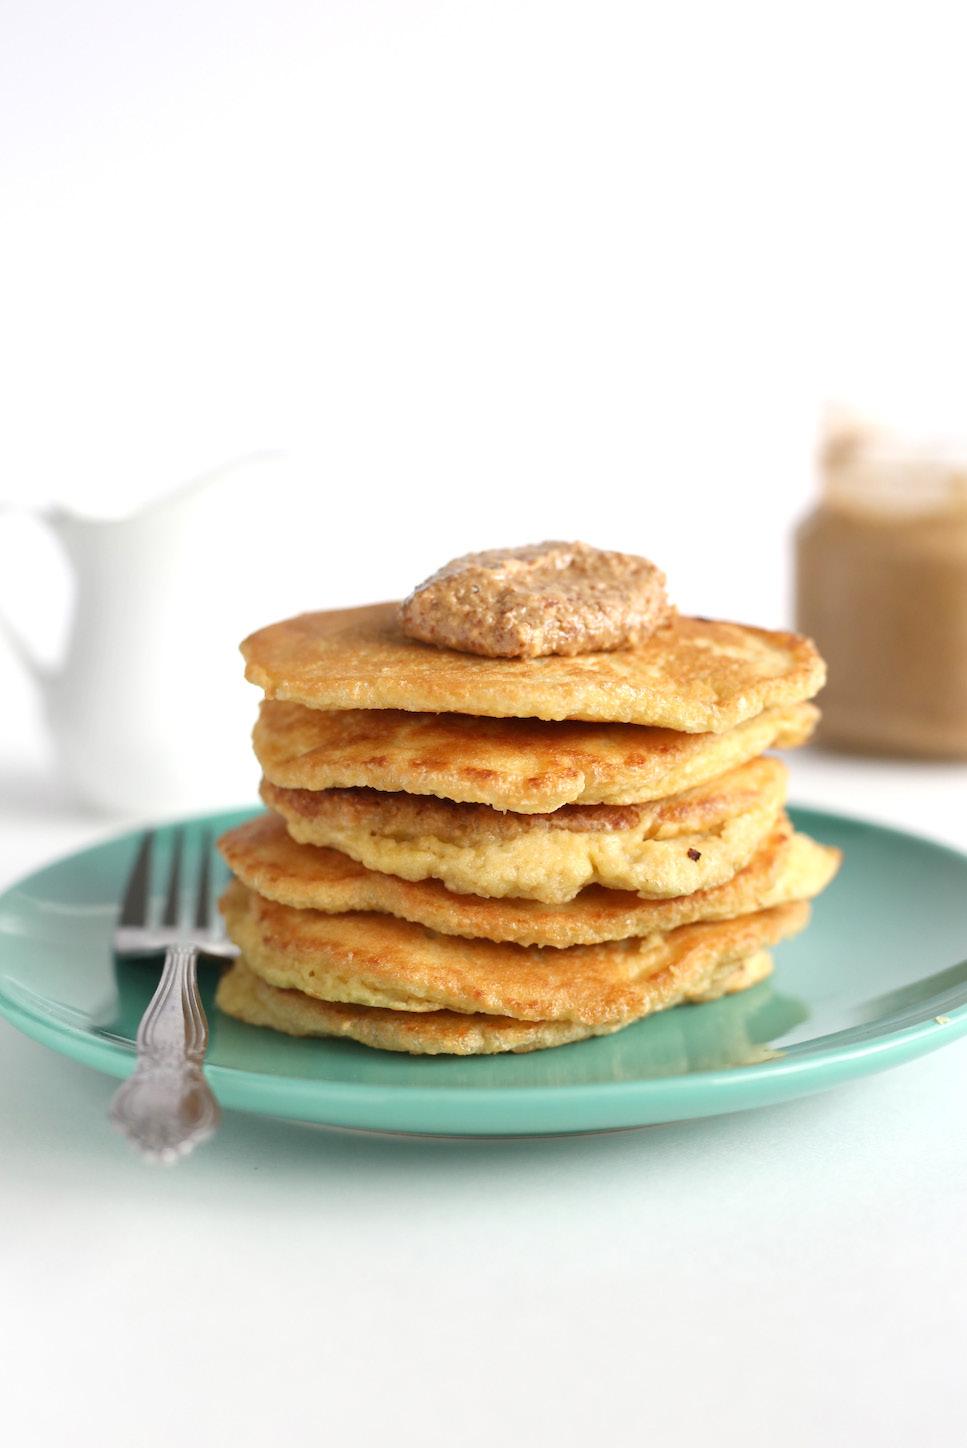 ALMOND FLOUR Pancakes Prep Time: 3 minutes Cook Time: 10 minutes 1 cup almond flour 4 eggs 1 t vanilla extract 1 T coconut oil 1. Whisk eggs and vanilla together in a large bowl; stir in almond flour.